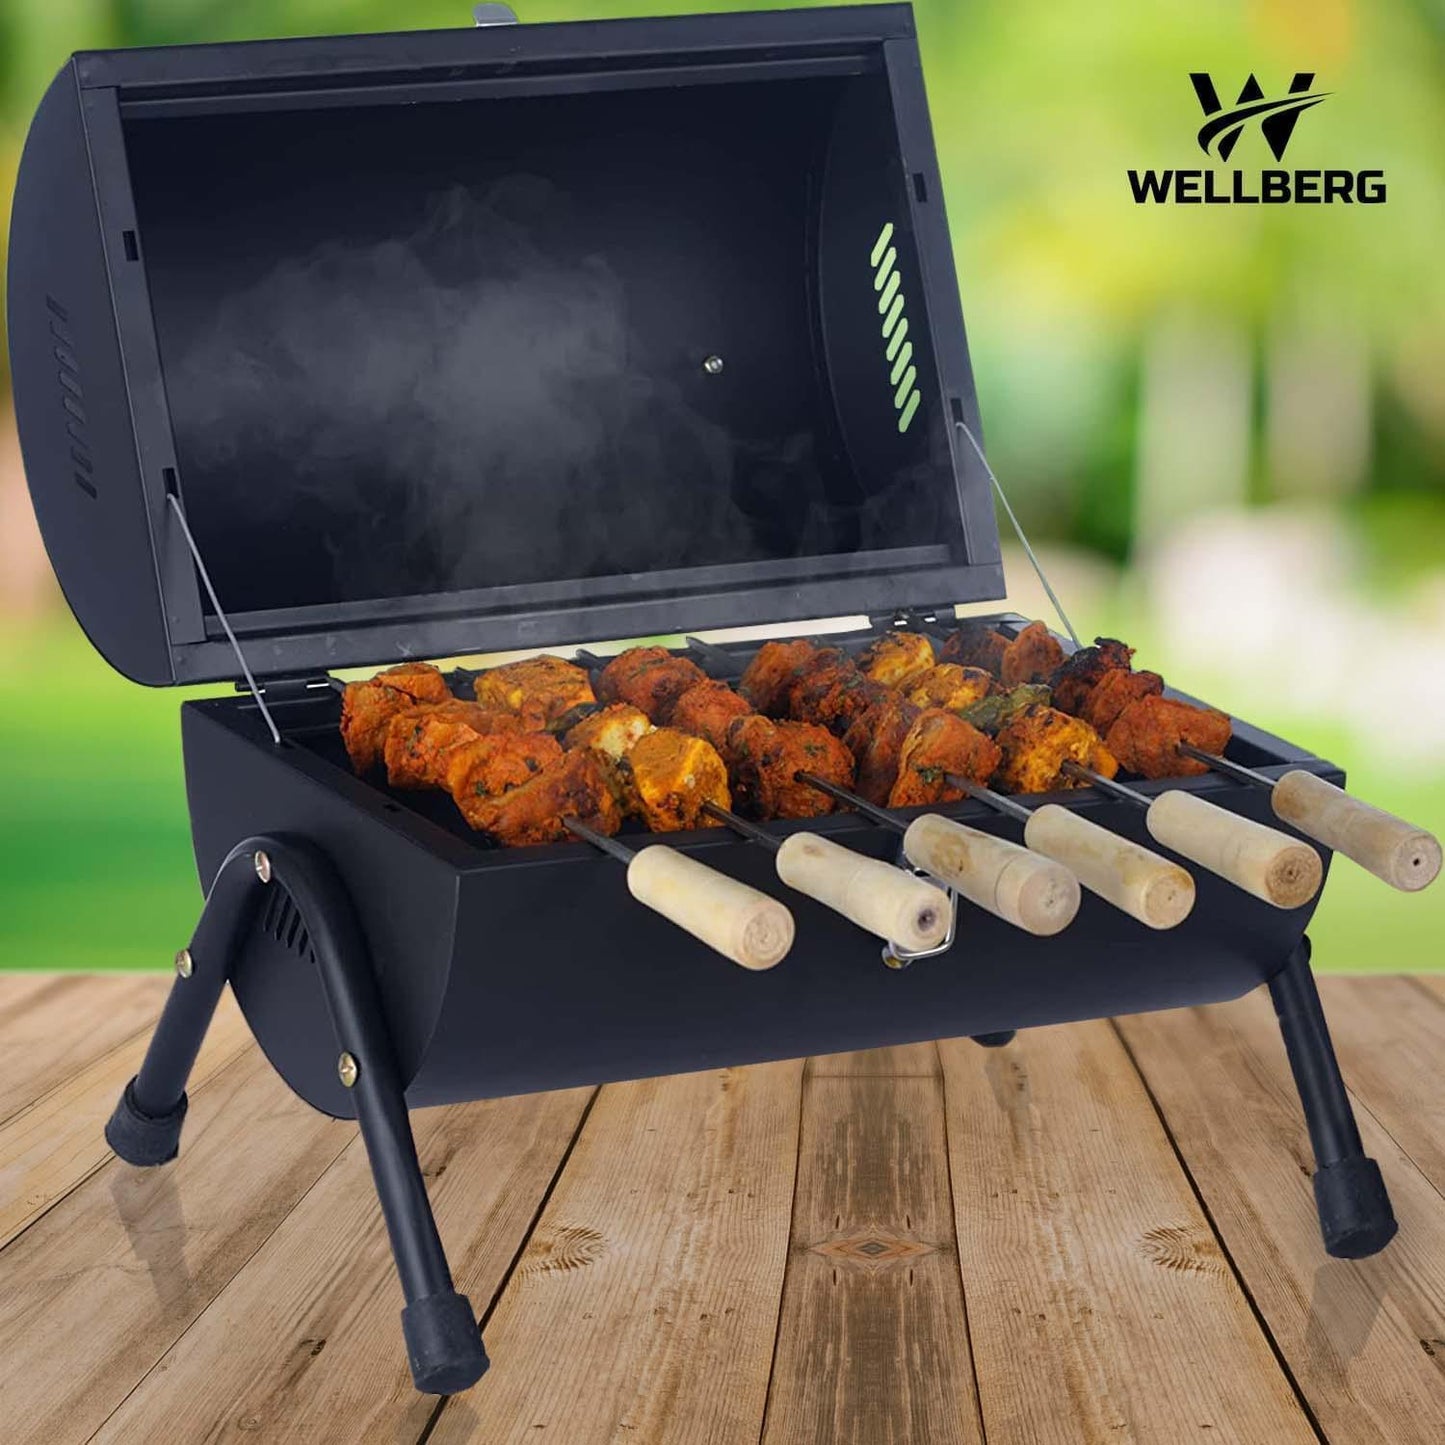 Wellberg Charcoal Barbeque Grill set with 6 Skewers | Peel Proof paint - WELLBERG